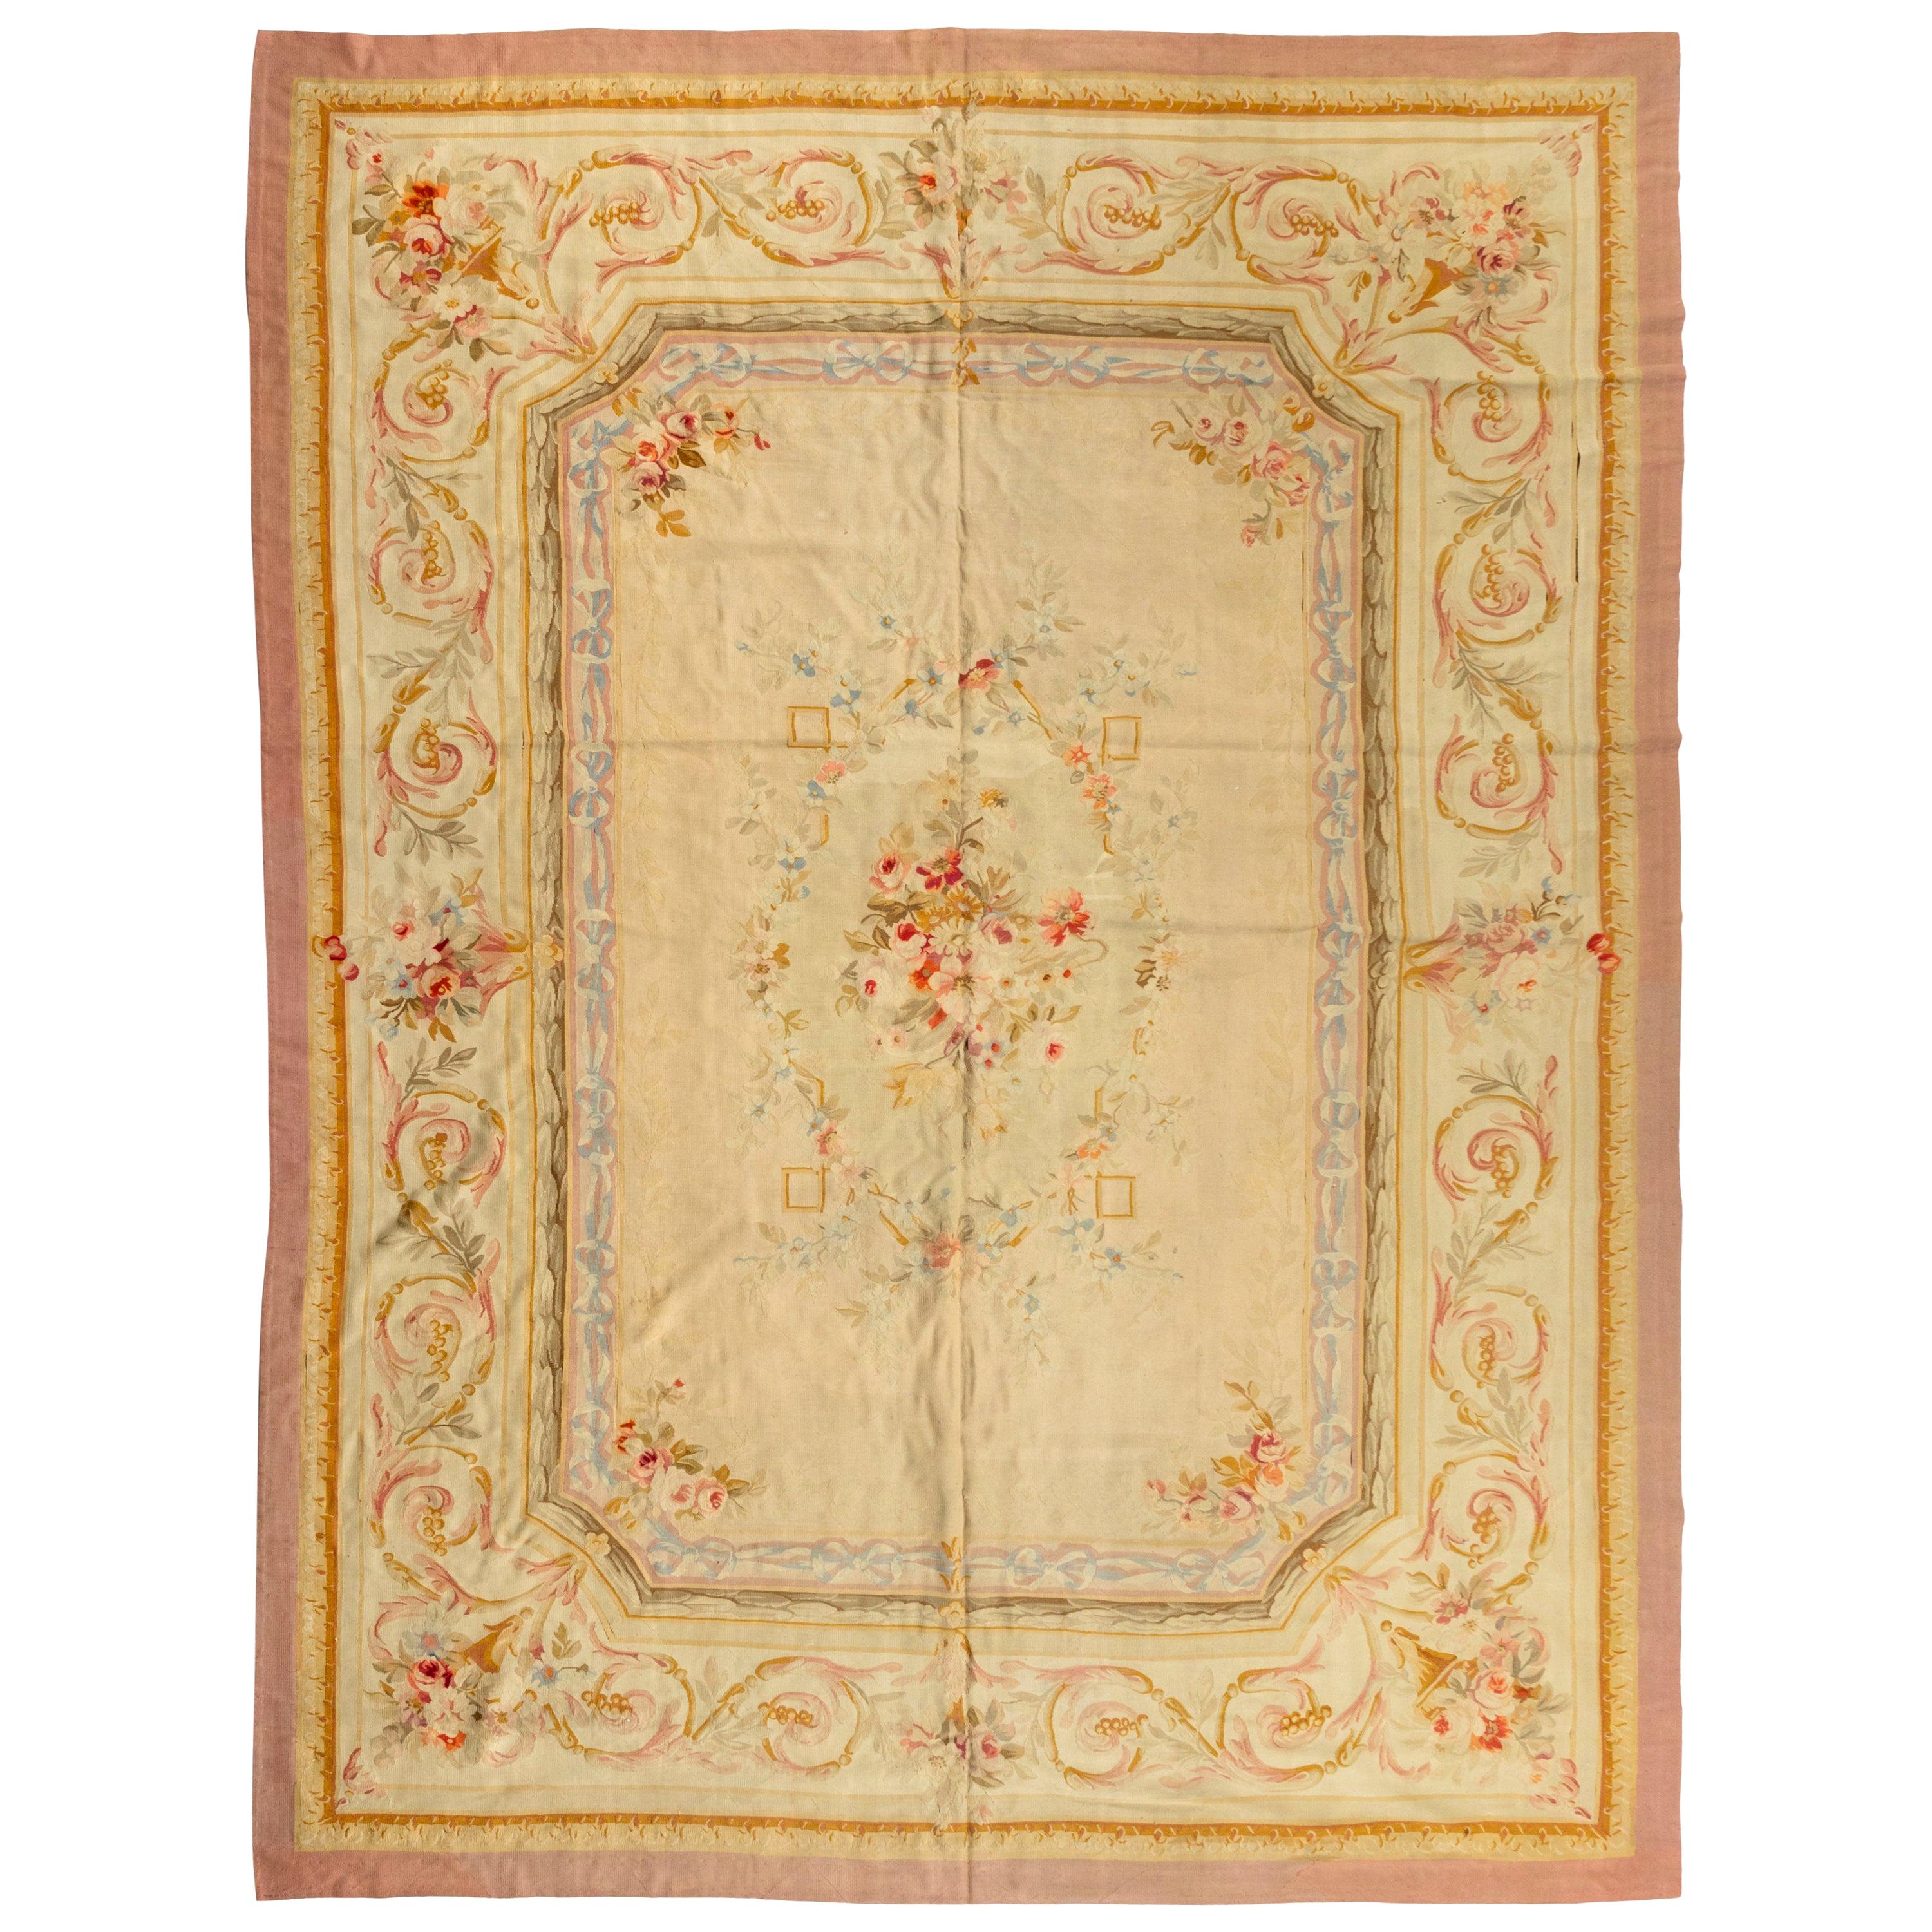 Late 19th Century Antique Ivory and Beige Floral French Aubusson Tapestry Rug For Sale